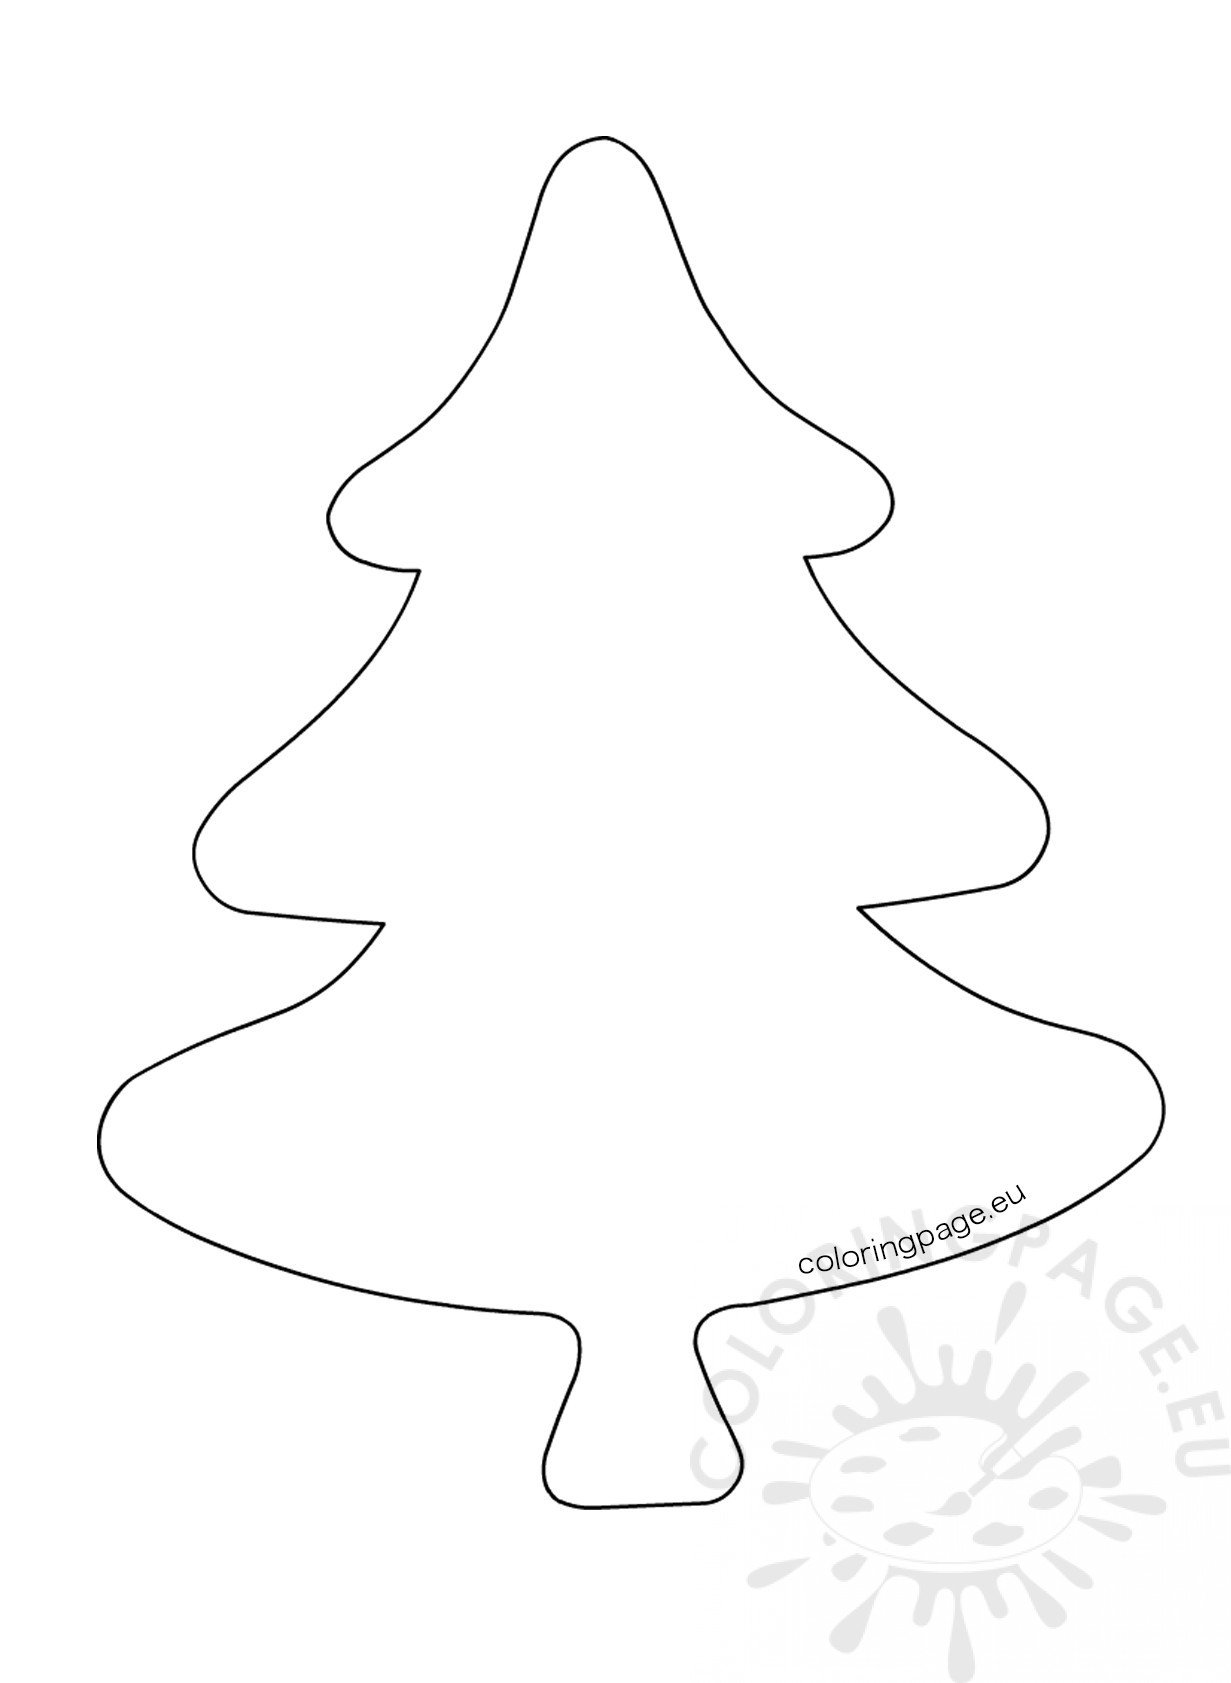 Felt Christmas Tree Ornament Template – Coloring Page